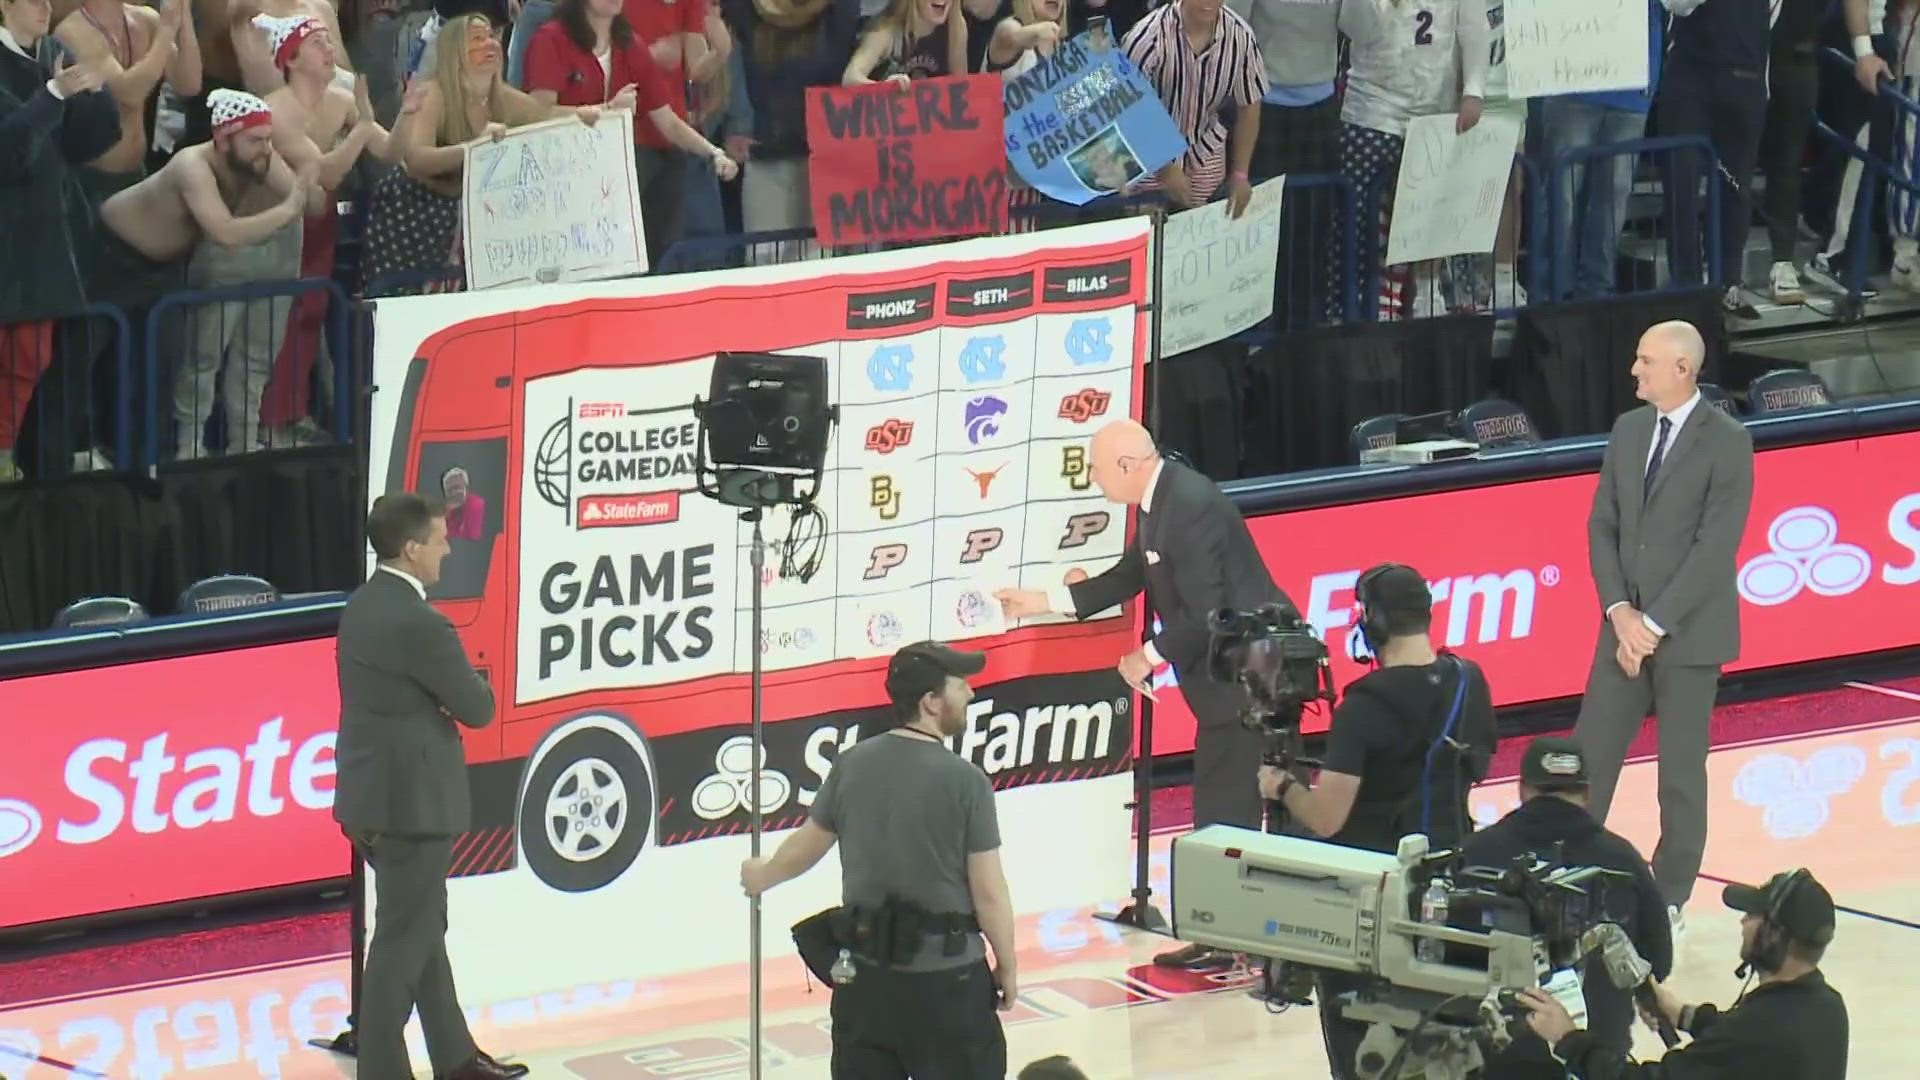 Zag fans brought a warm welcome to the College GameDay crew despite freezing temperatures outside.